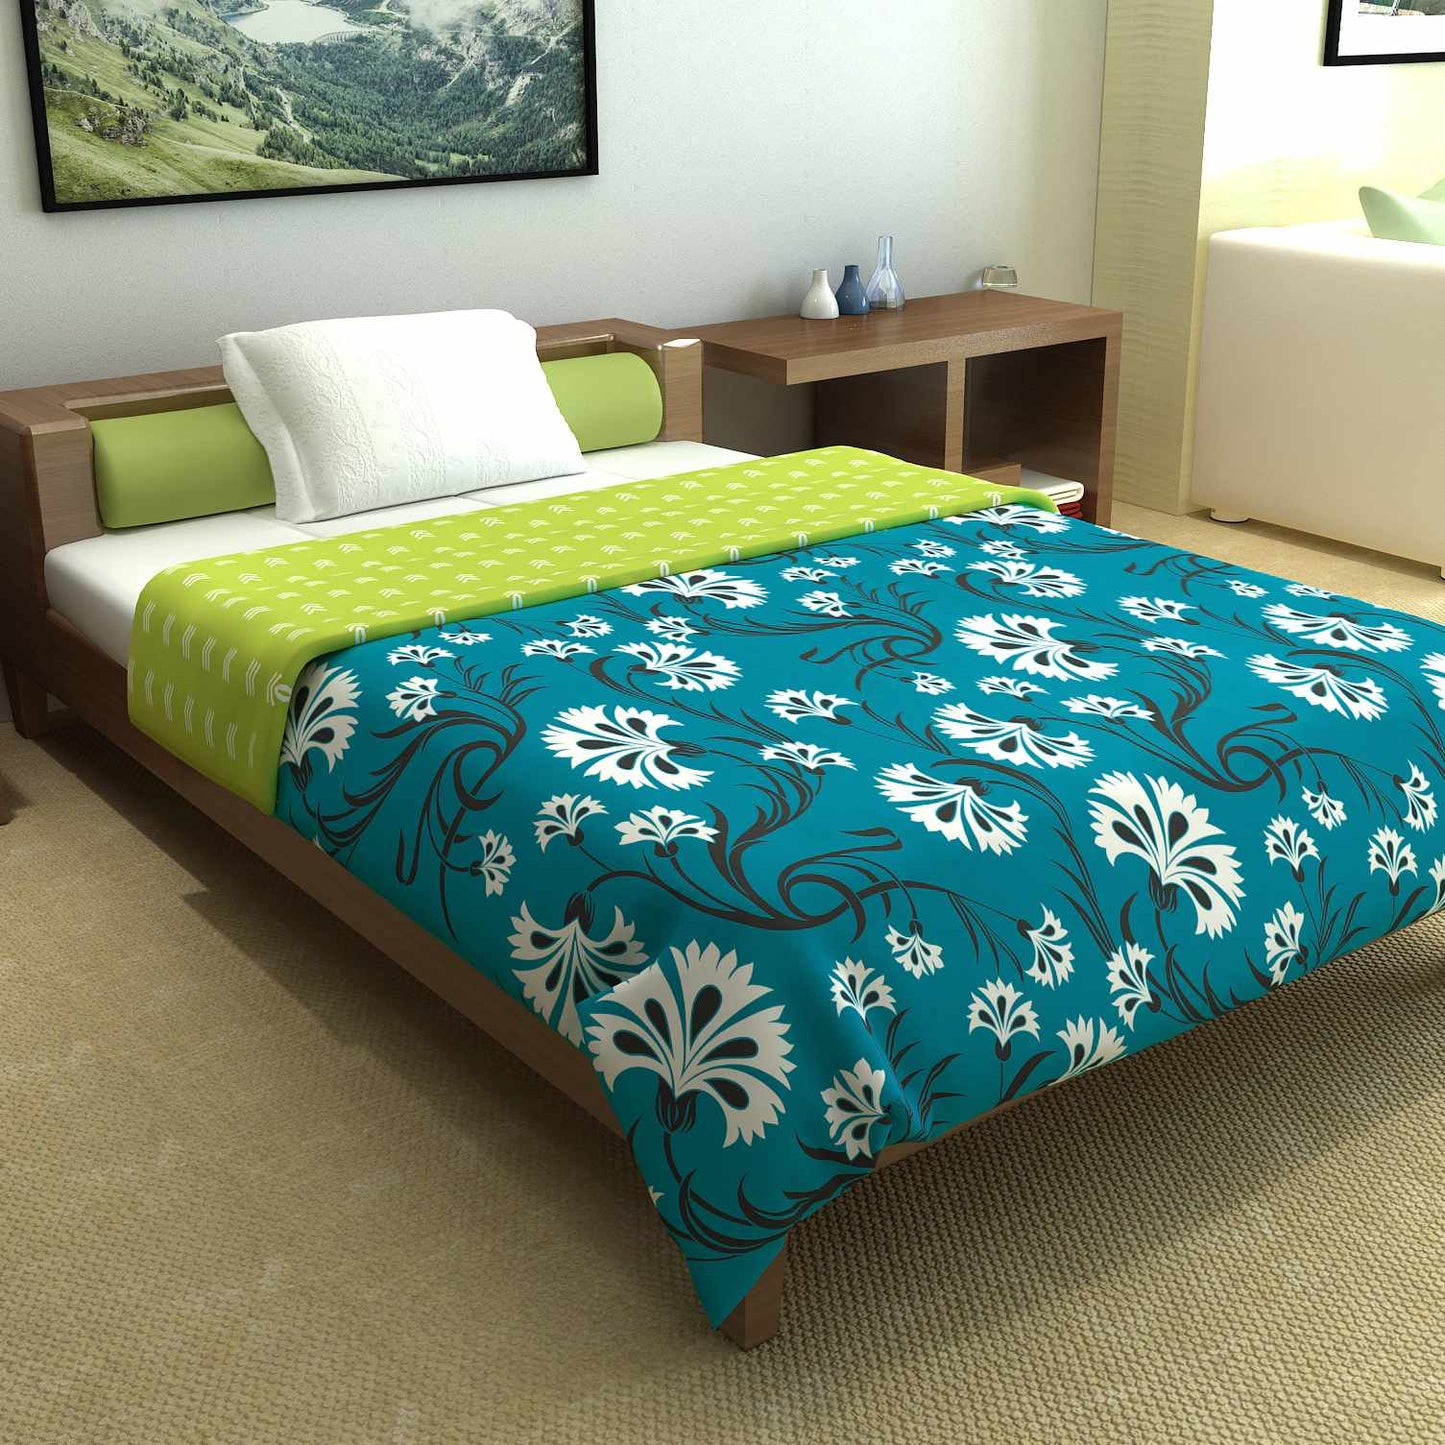 Ditsy Floral AC Quilt Comforter for Single Bed